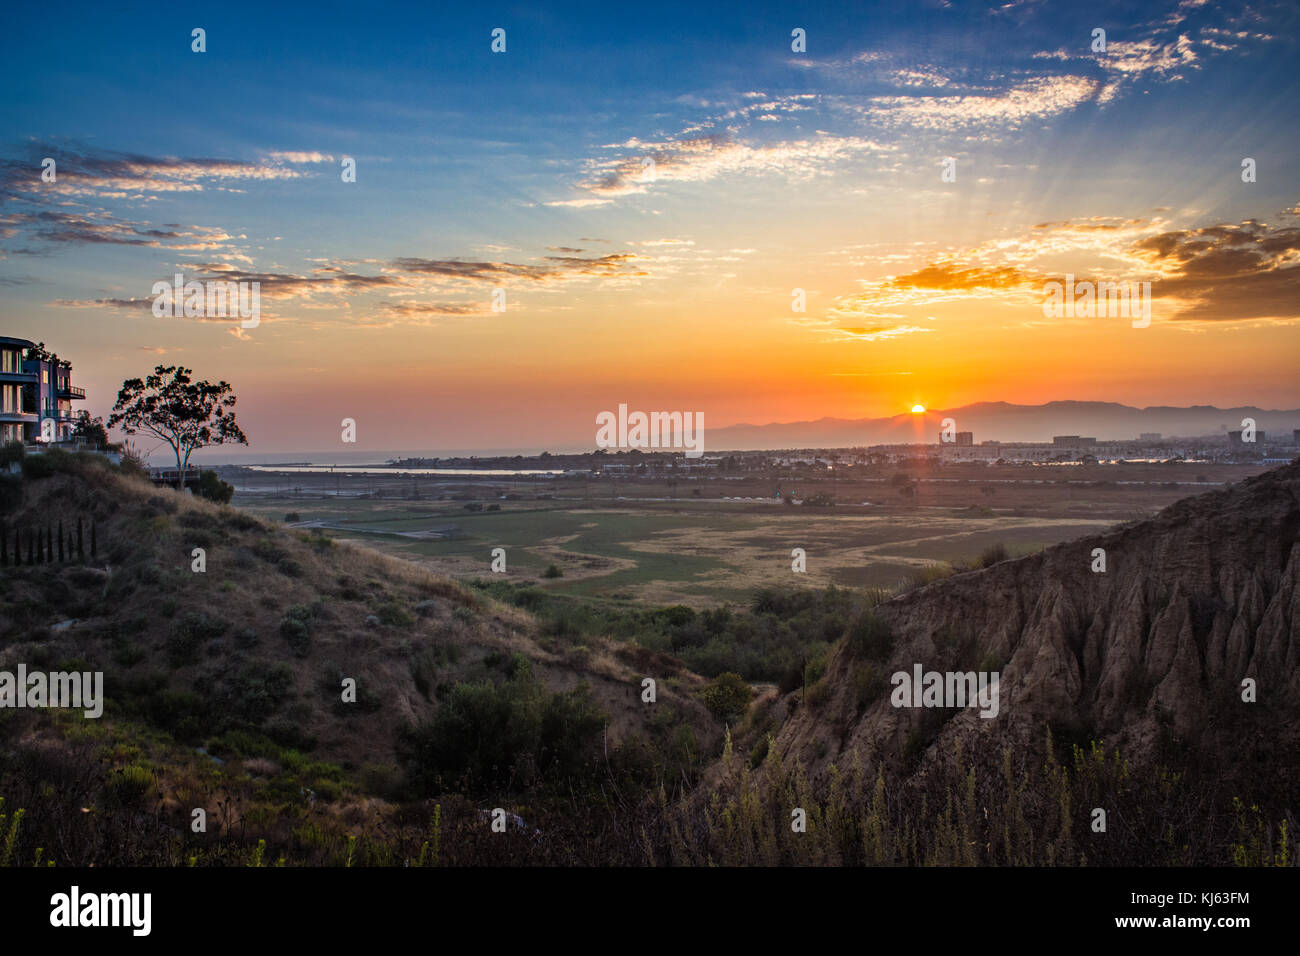 Dynamic sunset over the Ballona Wetlands from a scenic viewpoint on the Bluff Trail, Los Angeles, California Stock Photo